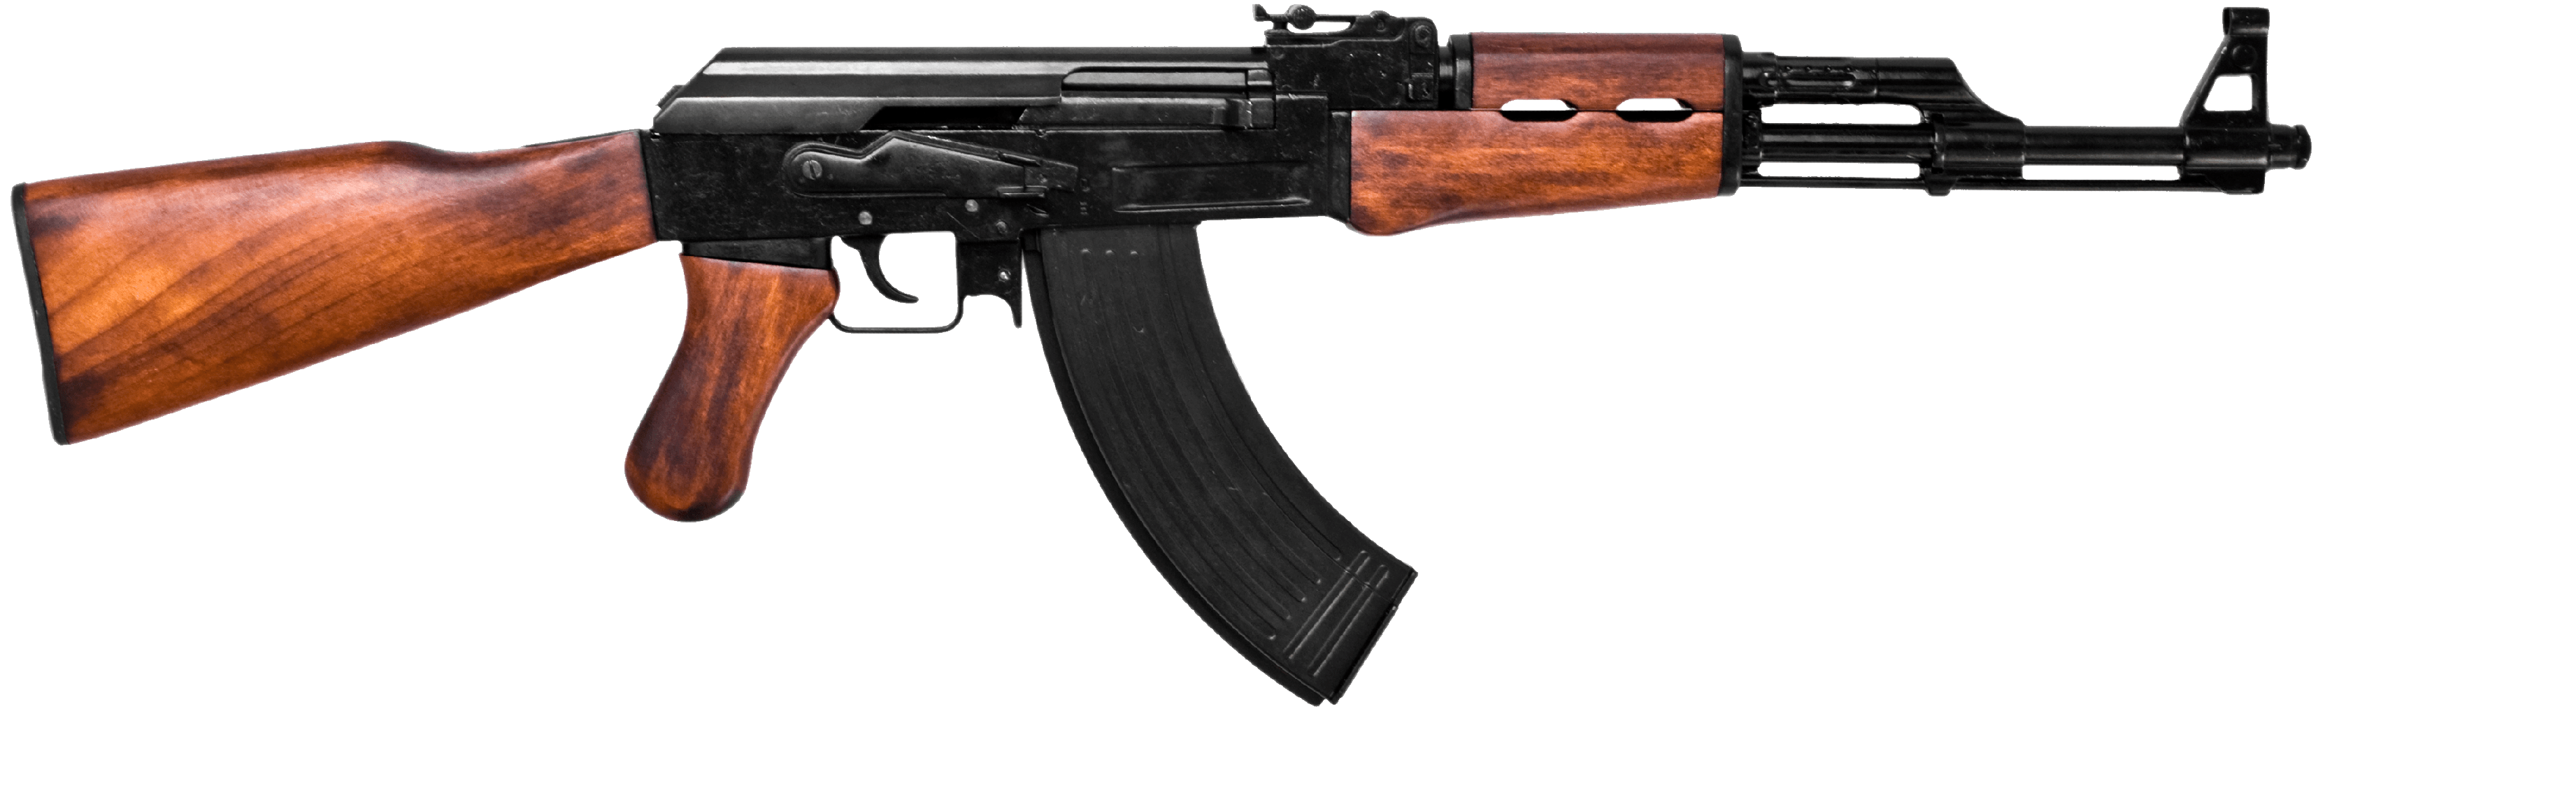 Assault rifle PNG Images On t